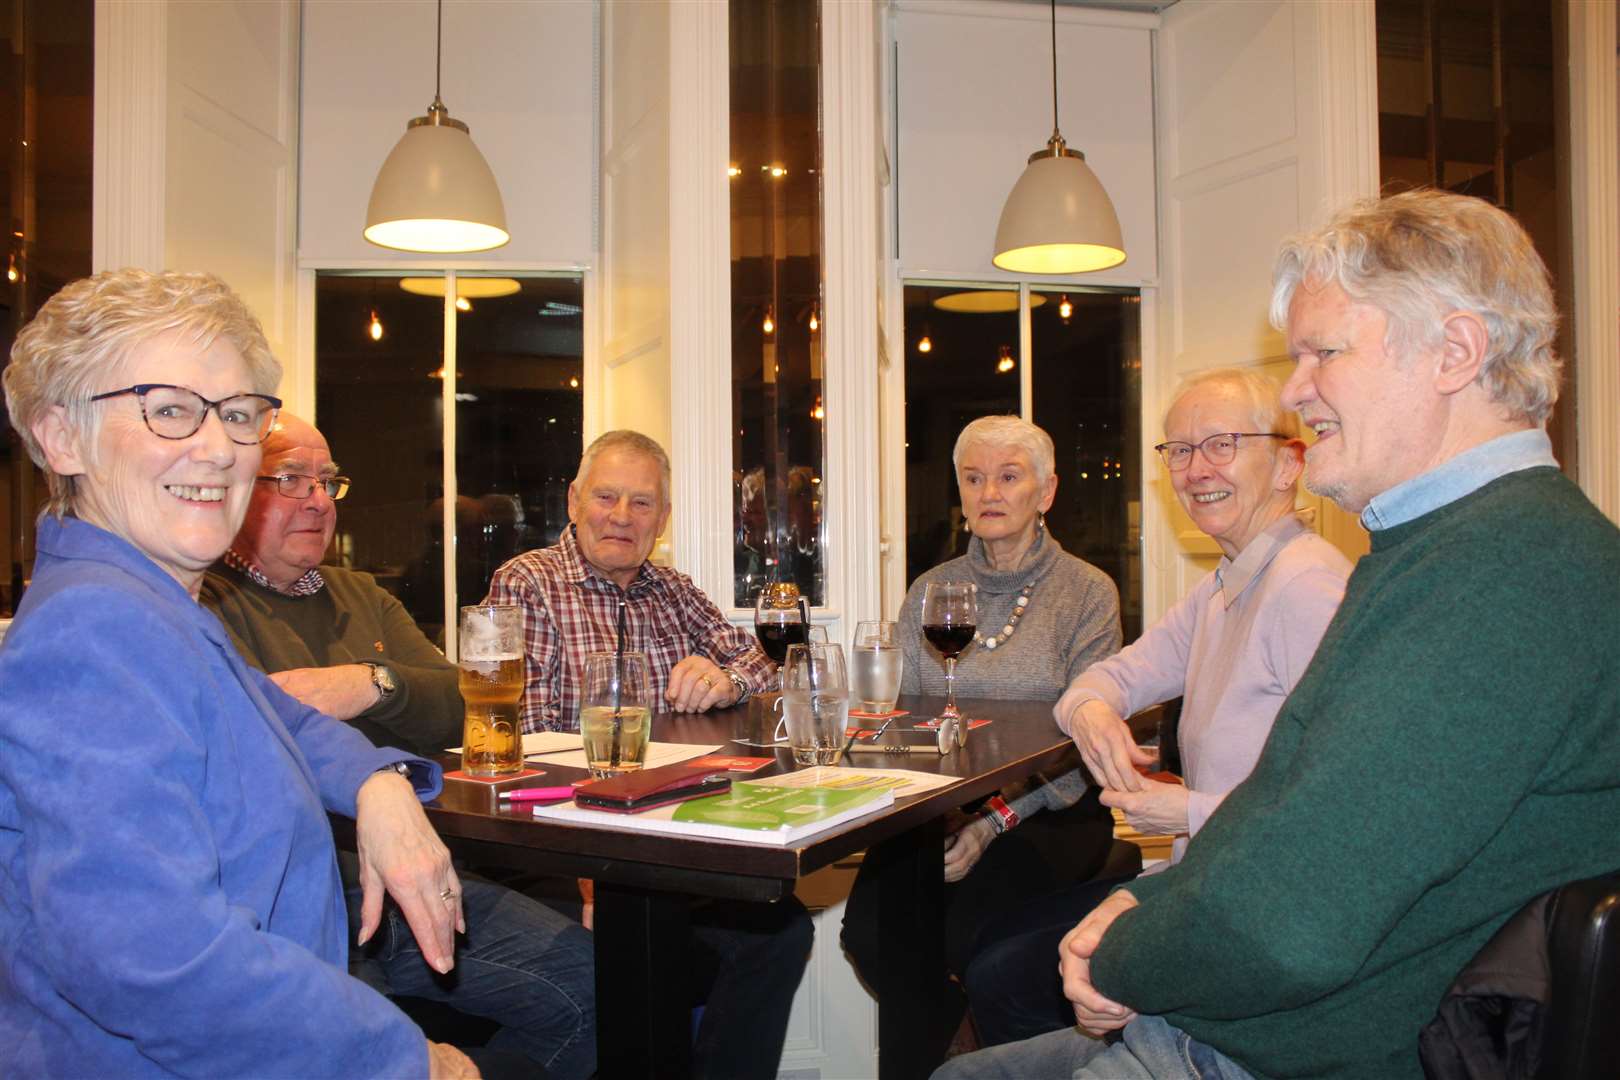 Garioch Heritage team pitted their wits in Thursday evenings quiz hosted by Inverurie BID at Edwards, Inverurie. From left Joan Bruce, Jim Ross, Tommy Winterburn, Ivy Guyan, Ann-Marie Coleman, Gib Bruce. Picture: Griselda McGregor